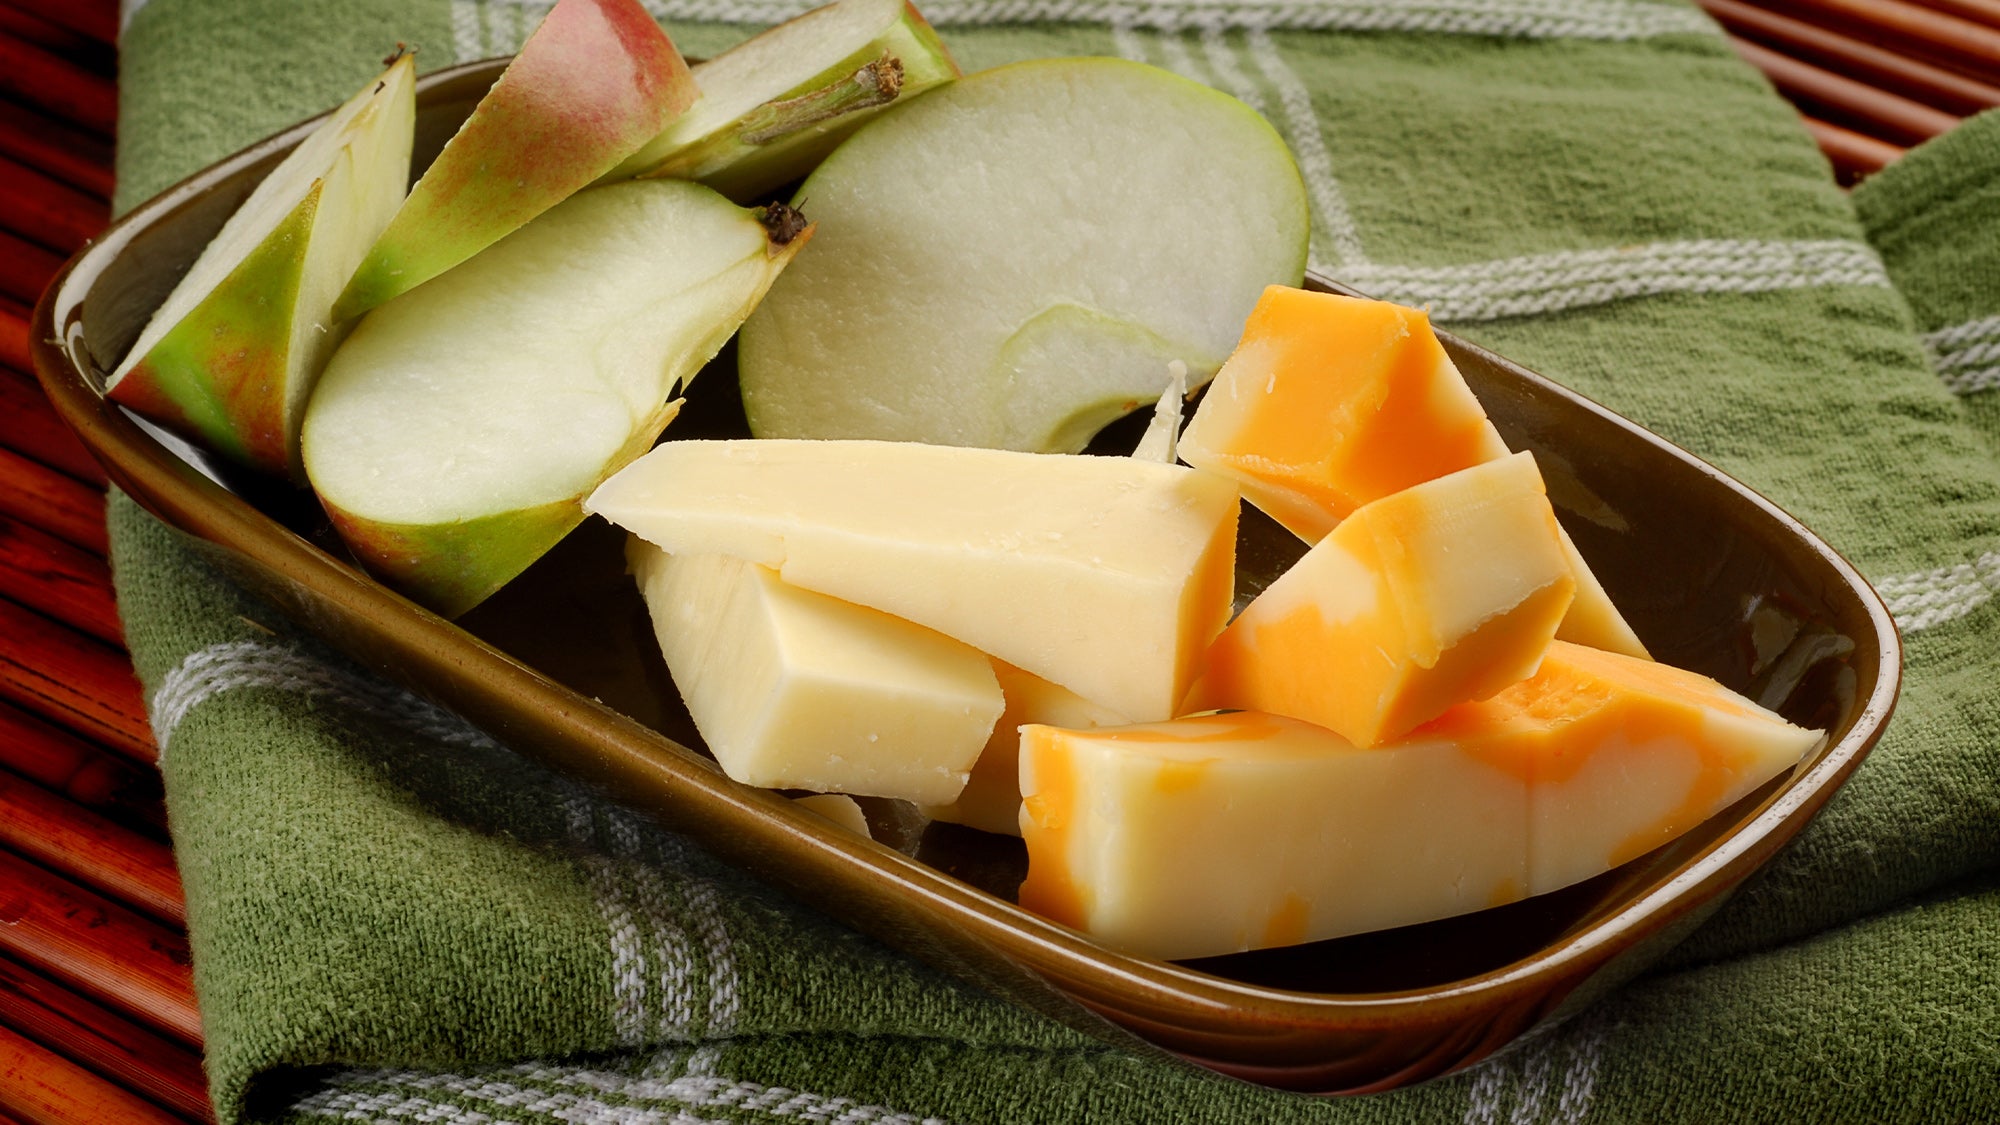 Apples and cheese on a green picnic blanket